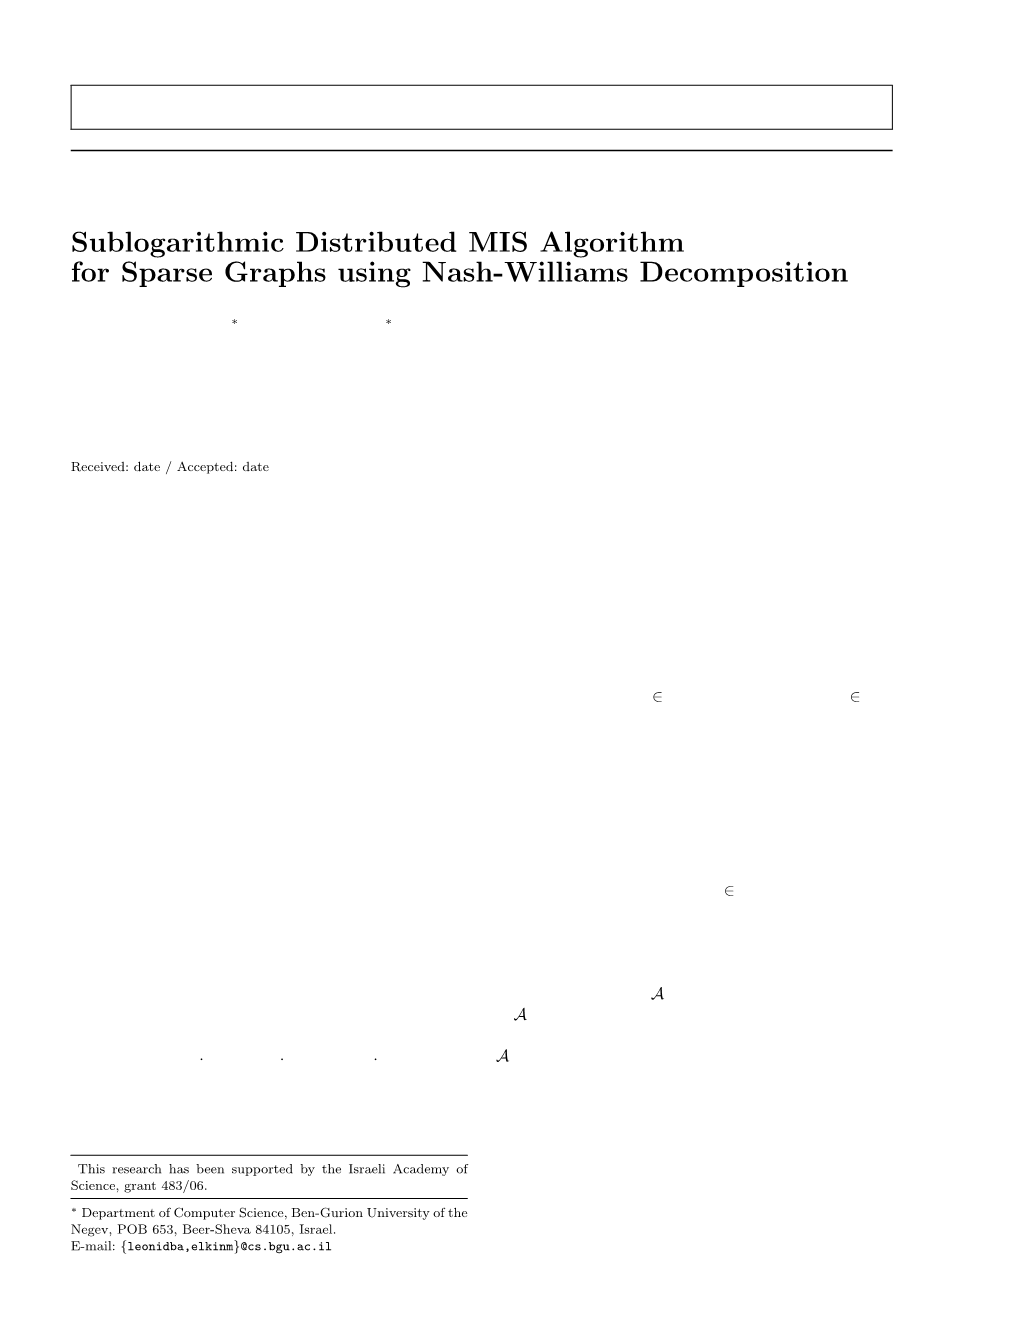 Sublogarithmic Distributed MIS Algorithm for Sparse Graphs Using Nash-Williams Decomposition